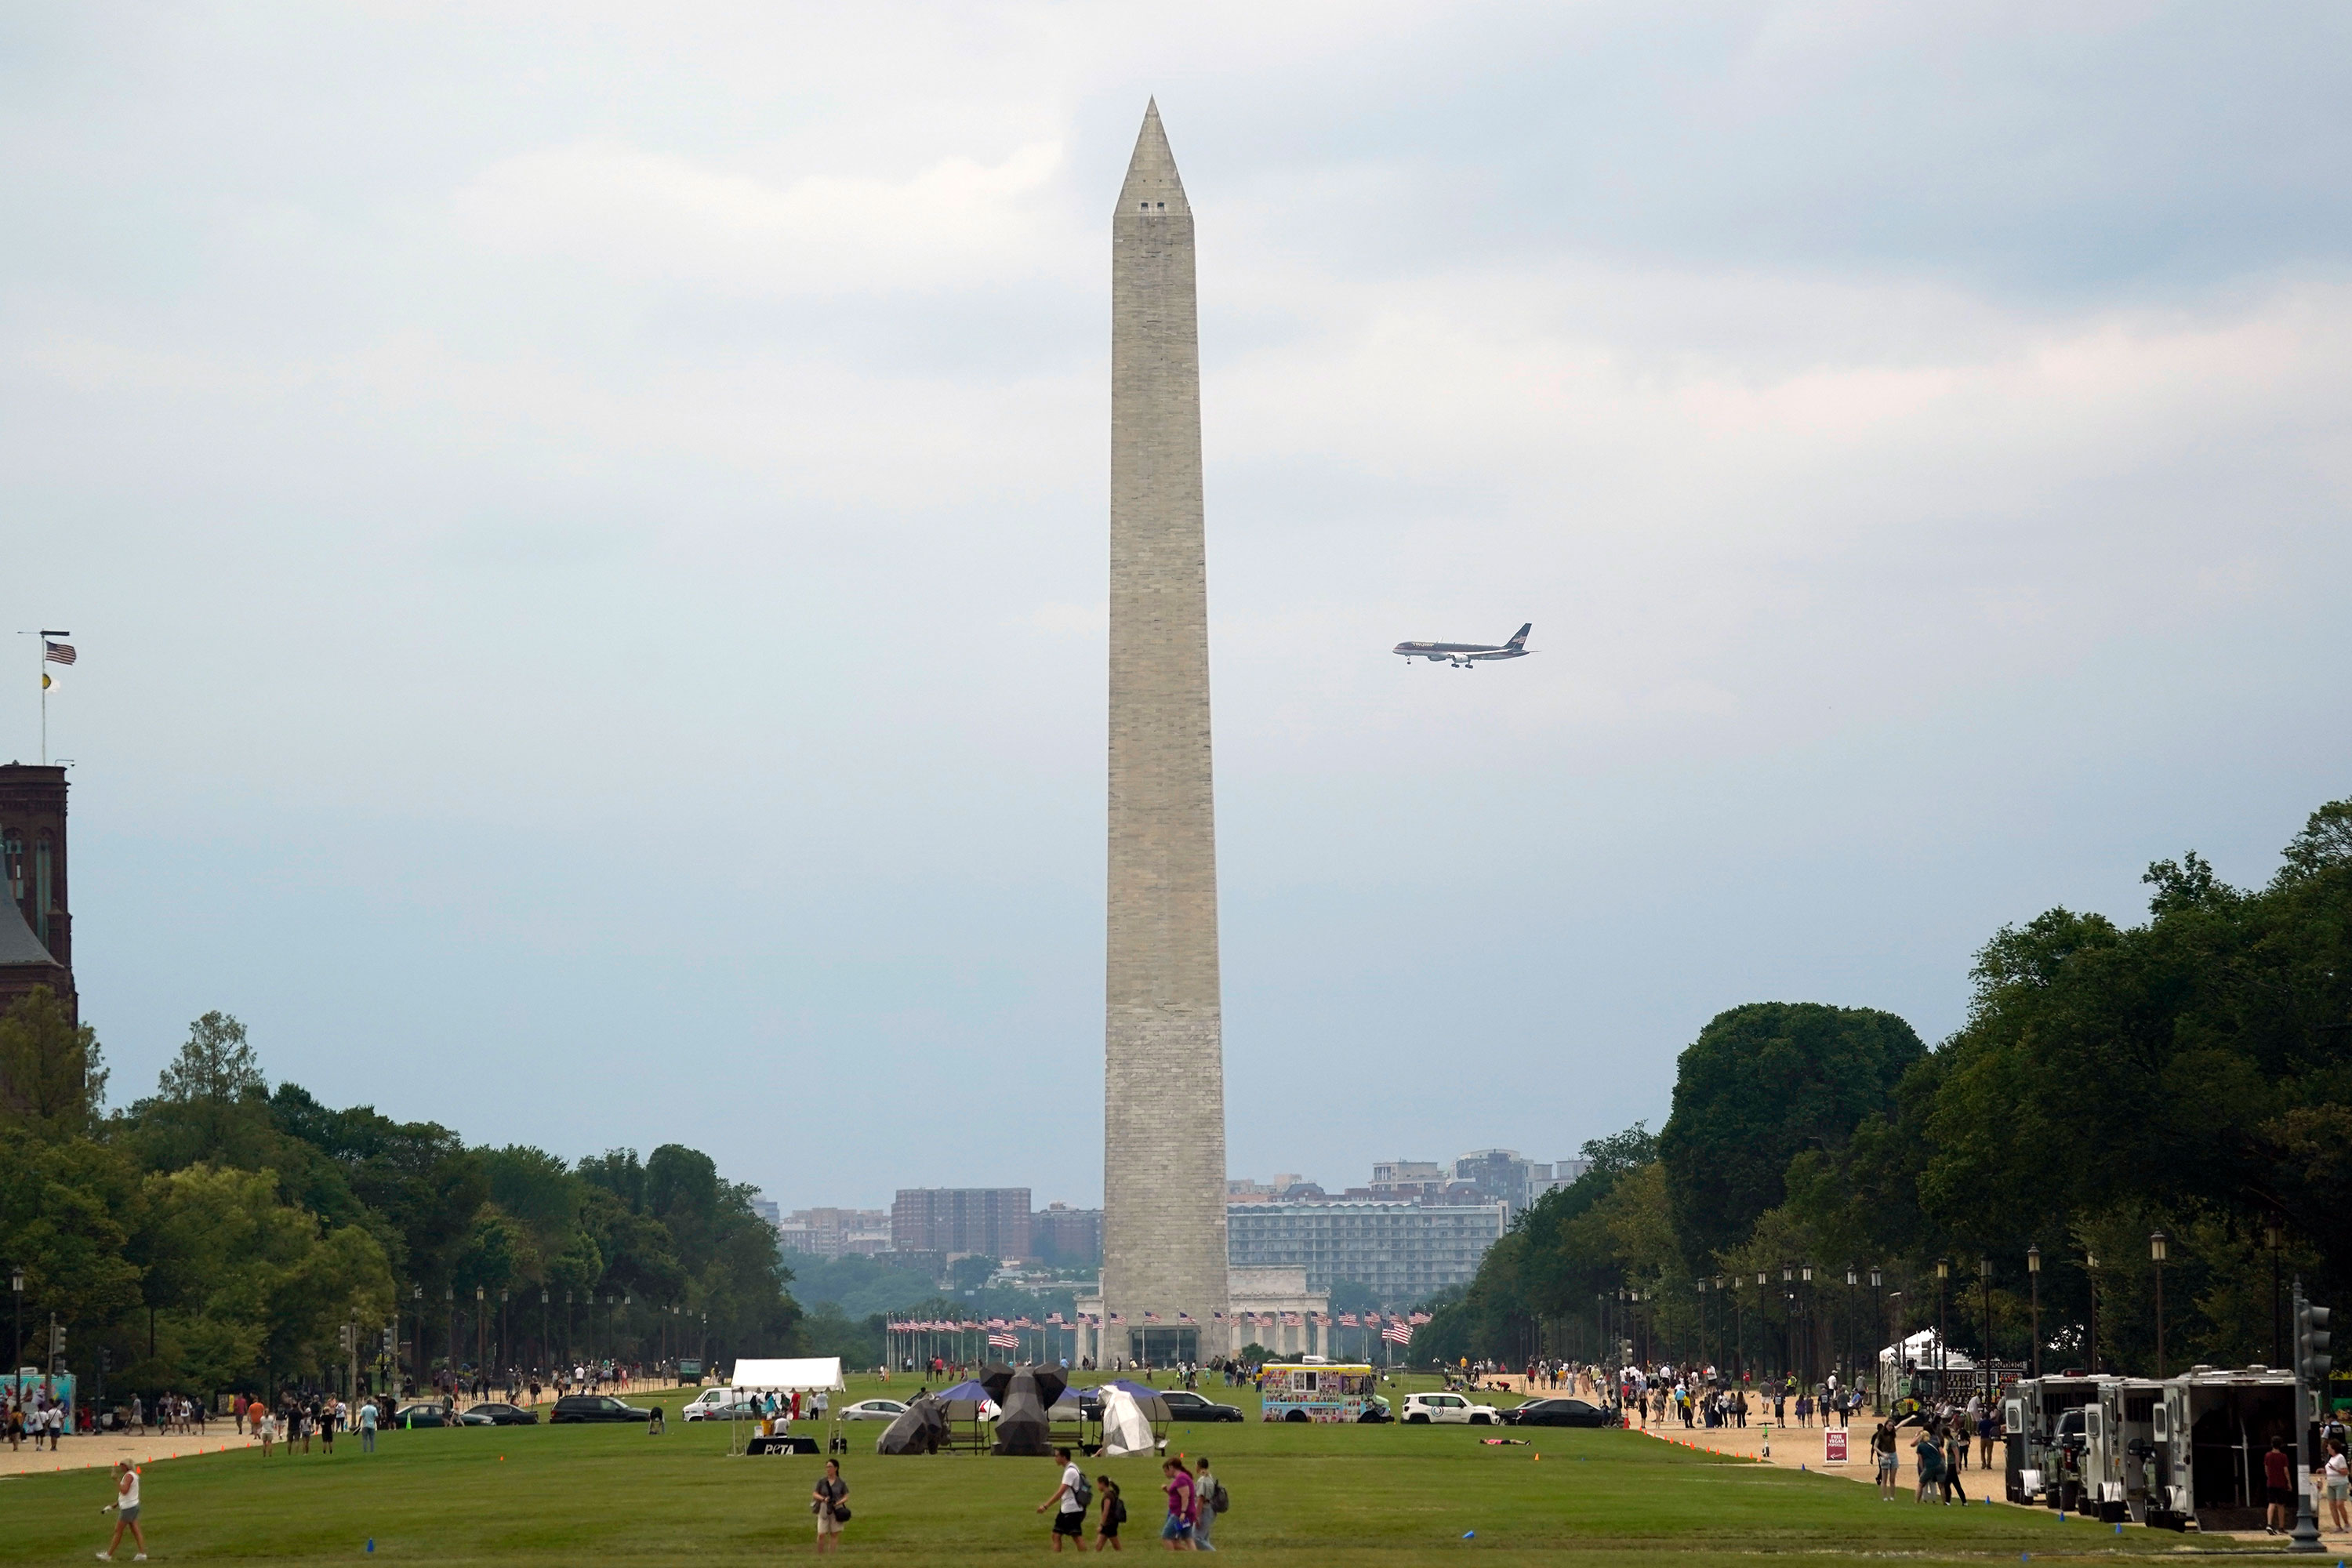 Former President Donald Trump's airplane flies behind the Washington Monument as it makes its final approach into Reagan National Airport on Thursday.